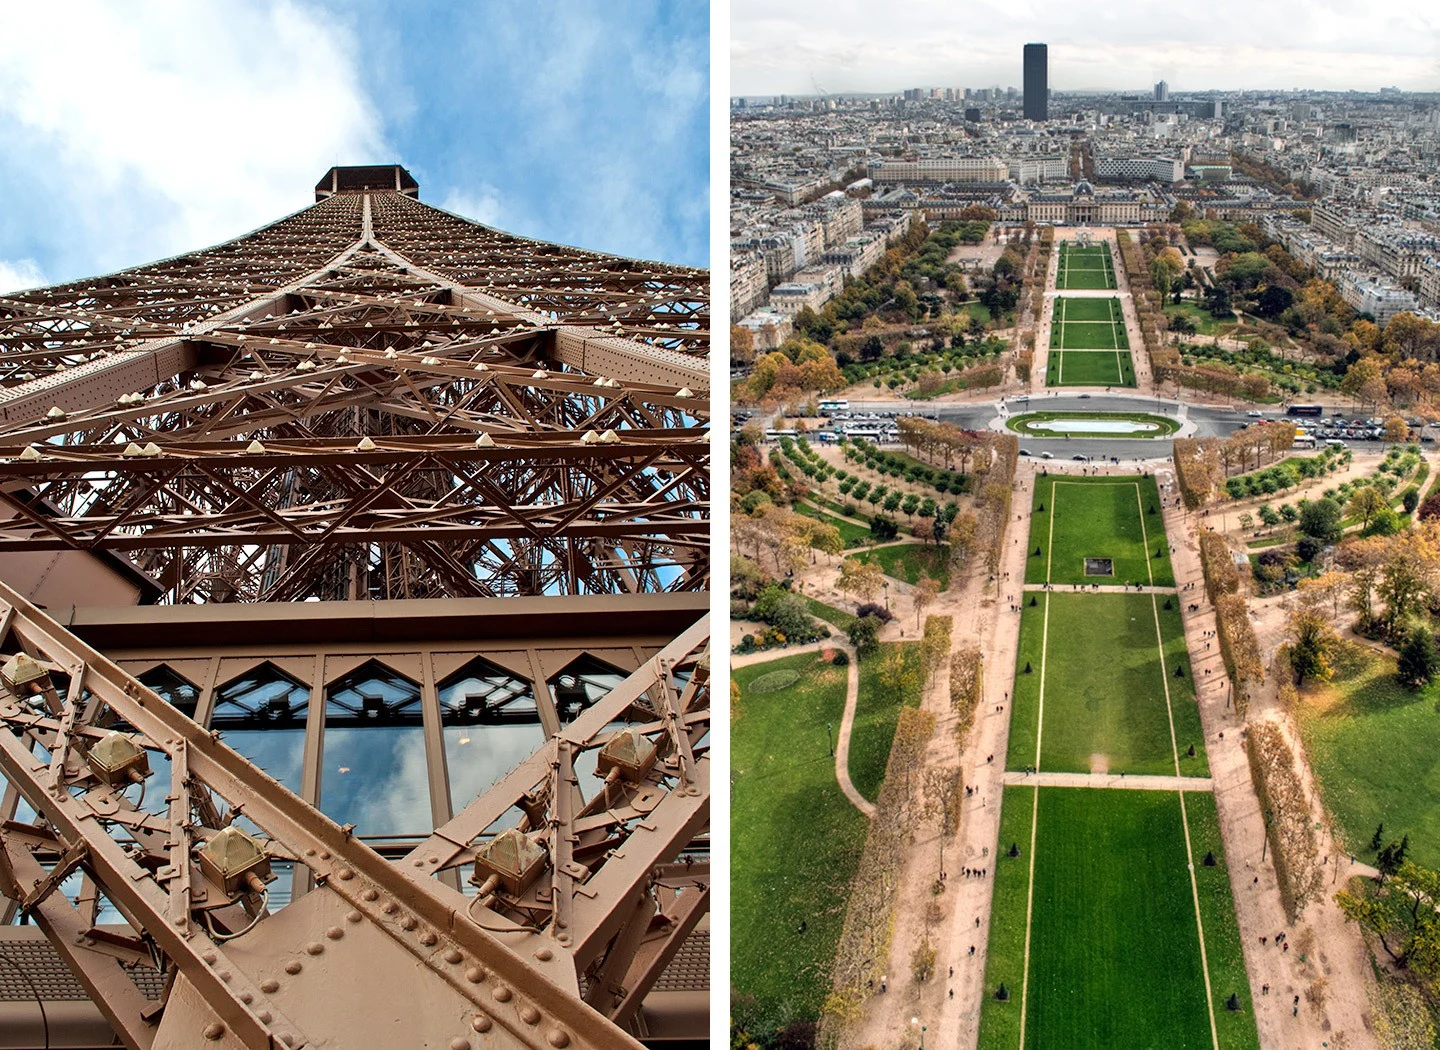 Views of and from the Eiffel Tower